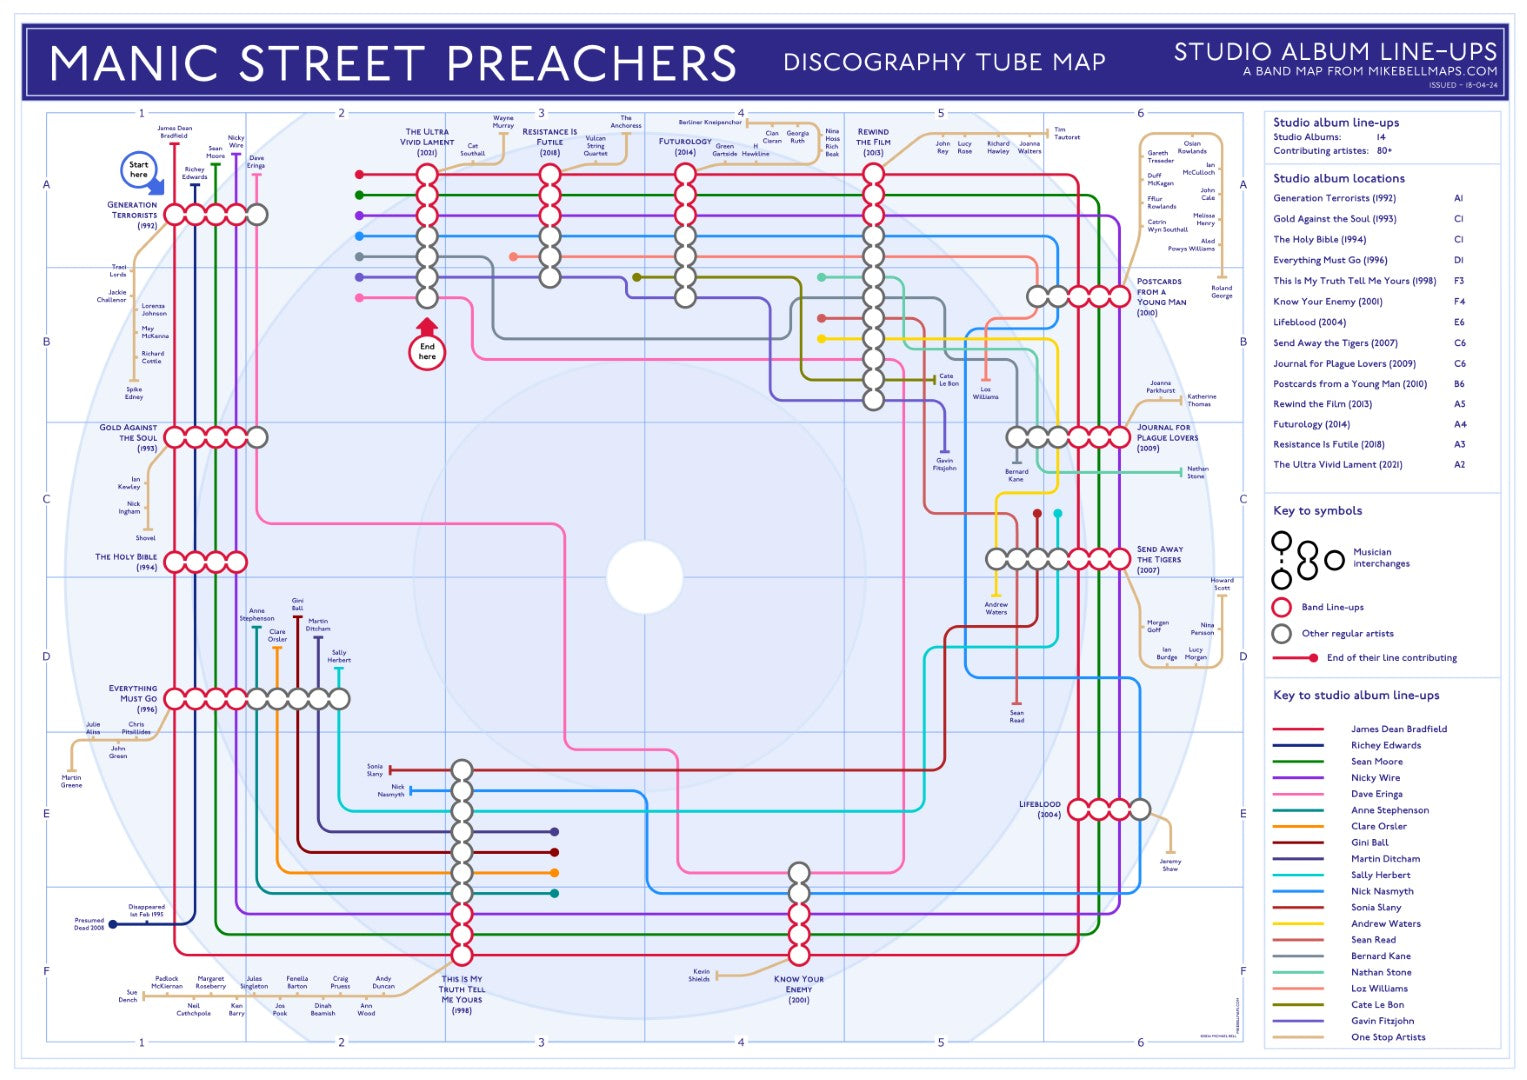 Mike Bell Tube Band Map Discography - Manic Street Preachers 06